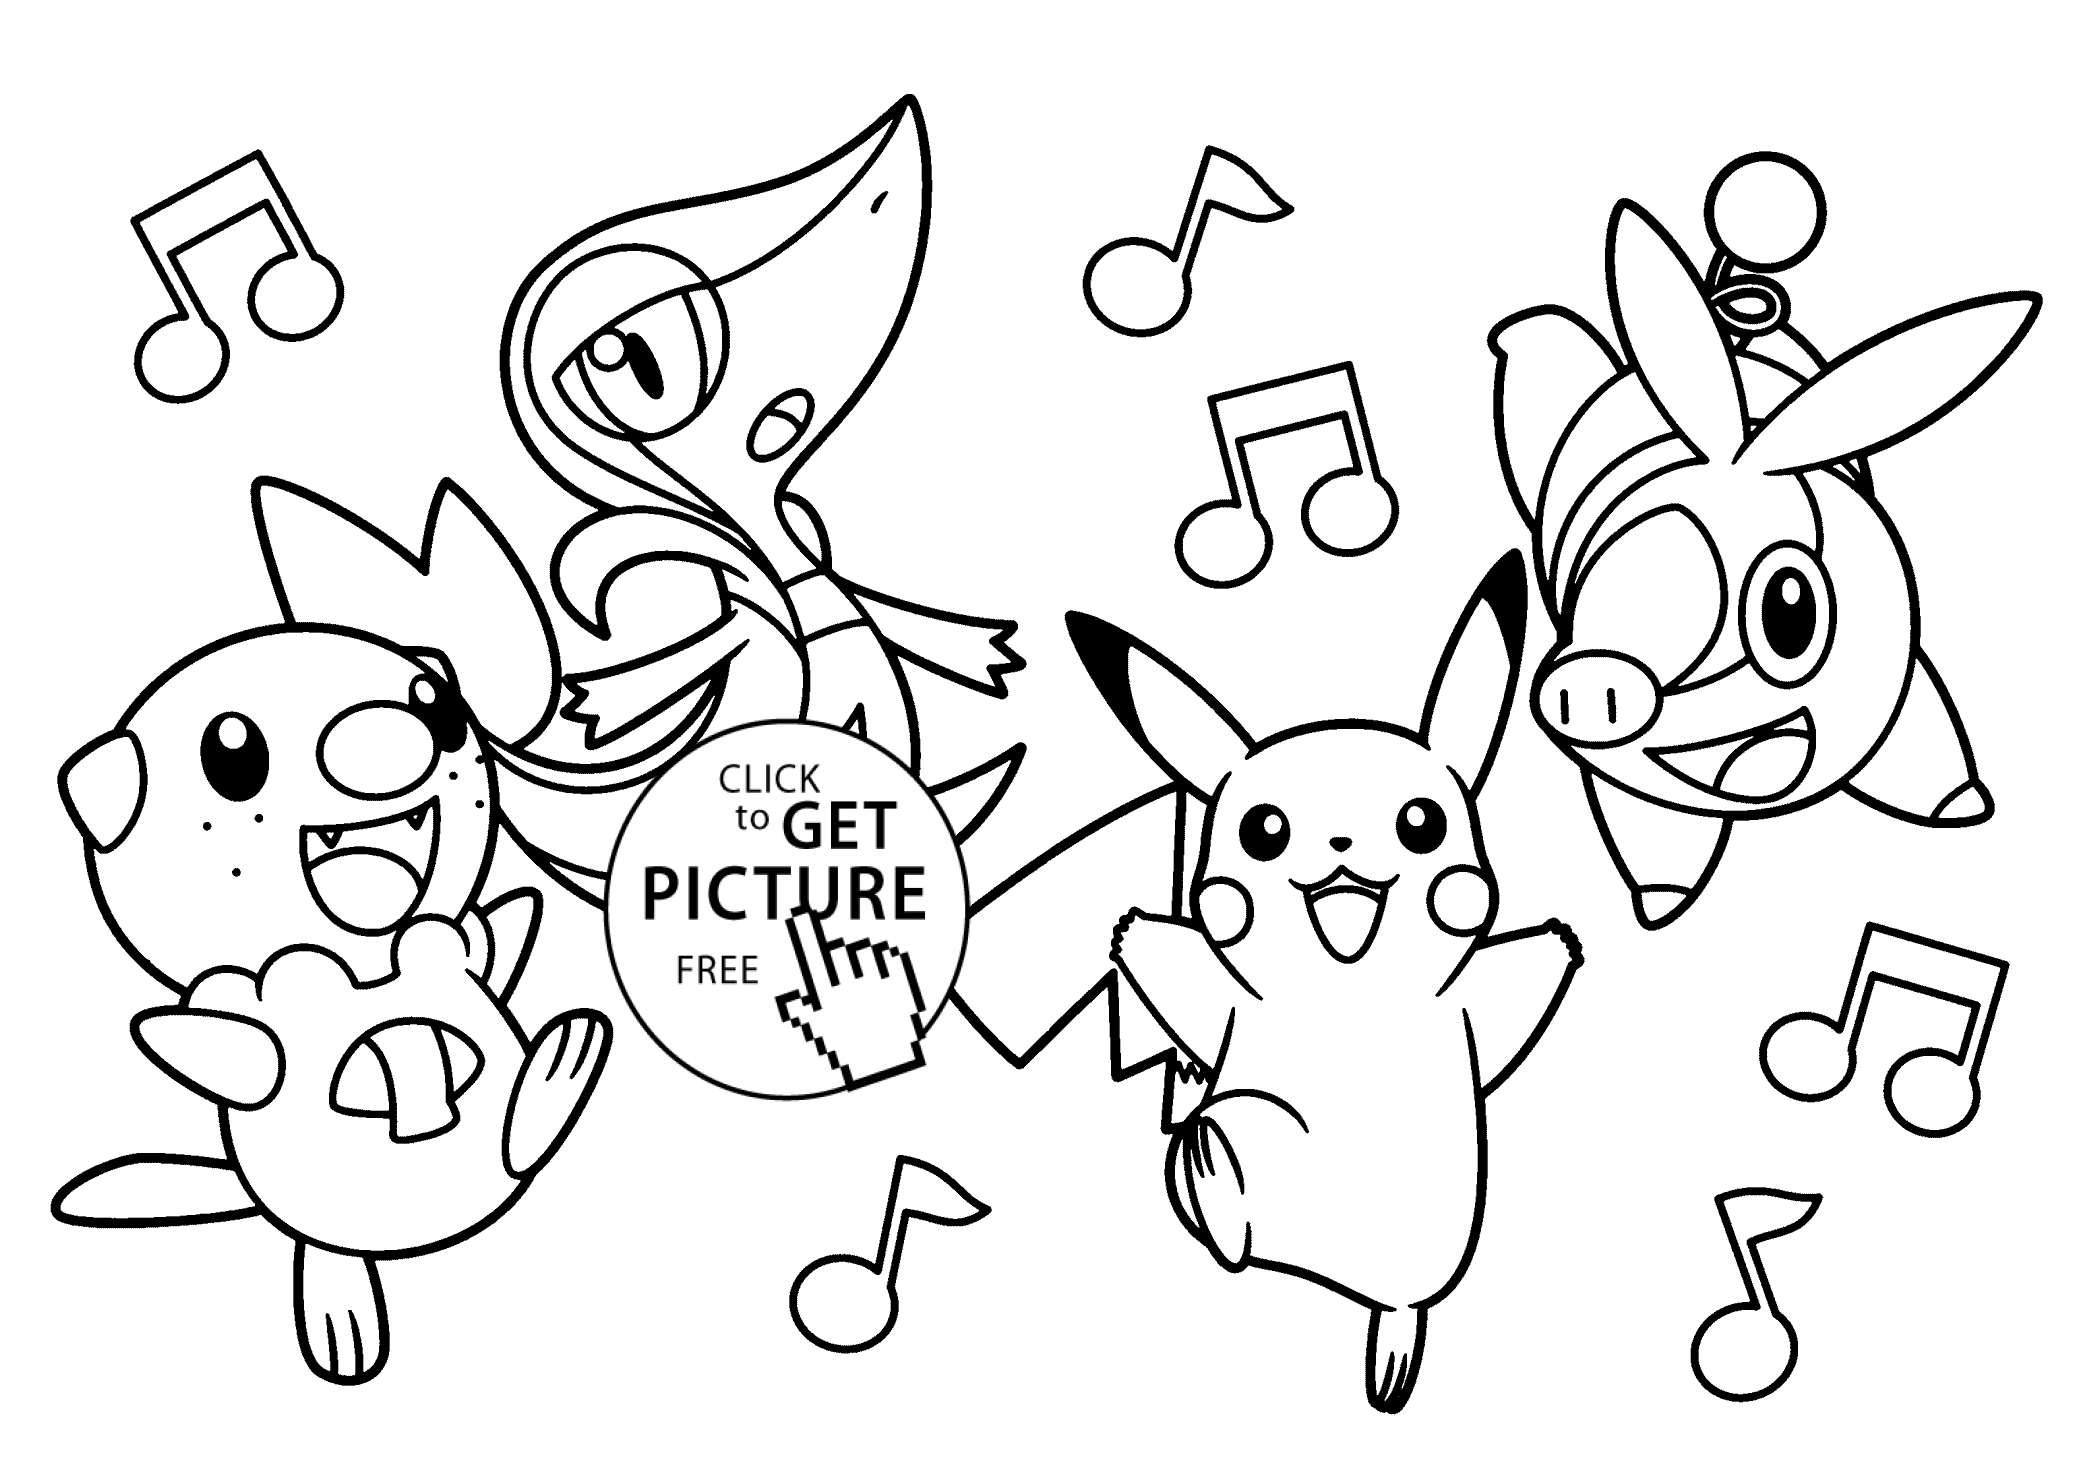 pictures of pokemon to color top 93 free printable pokemon coloring pages online color of pokemon to pictures 